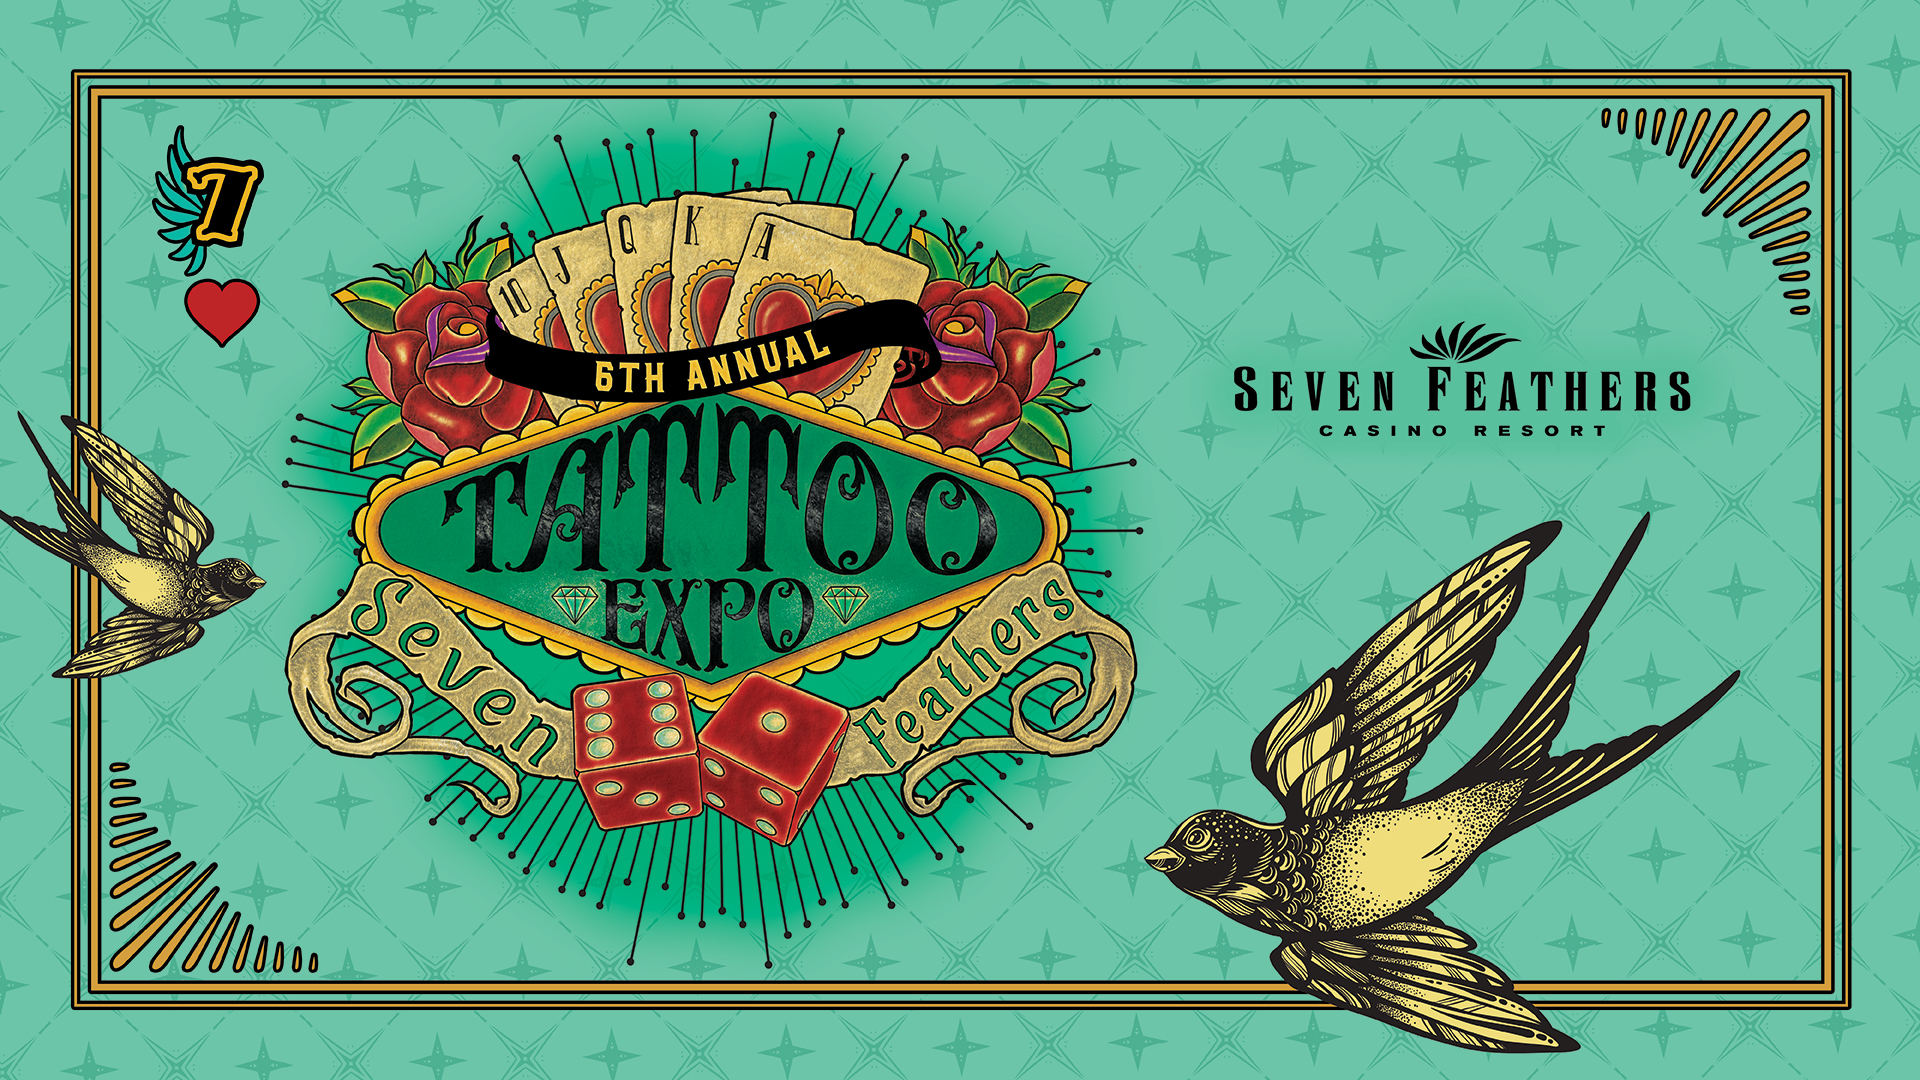 Seven Feathers Casino Resort Is Hosting Its 6th Annual Tattoo Expo This April